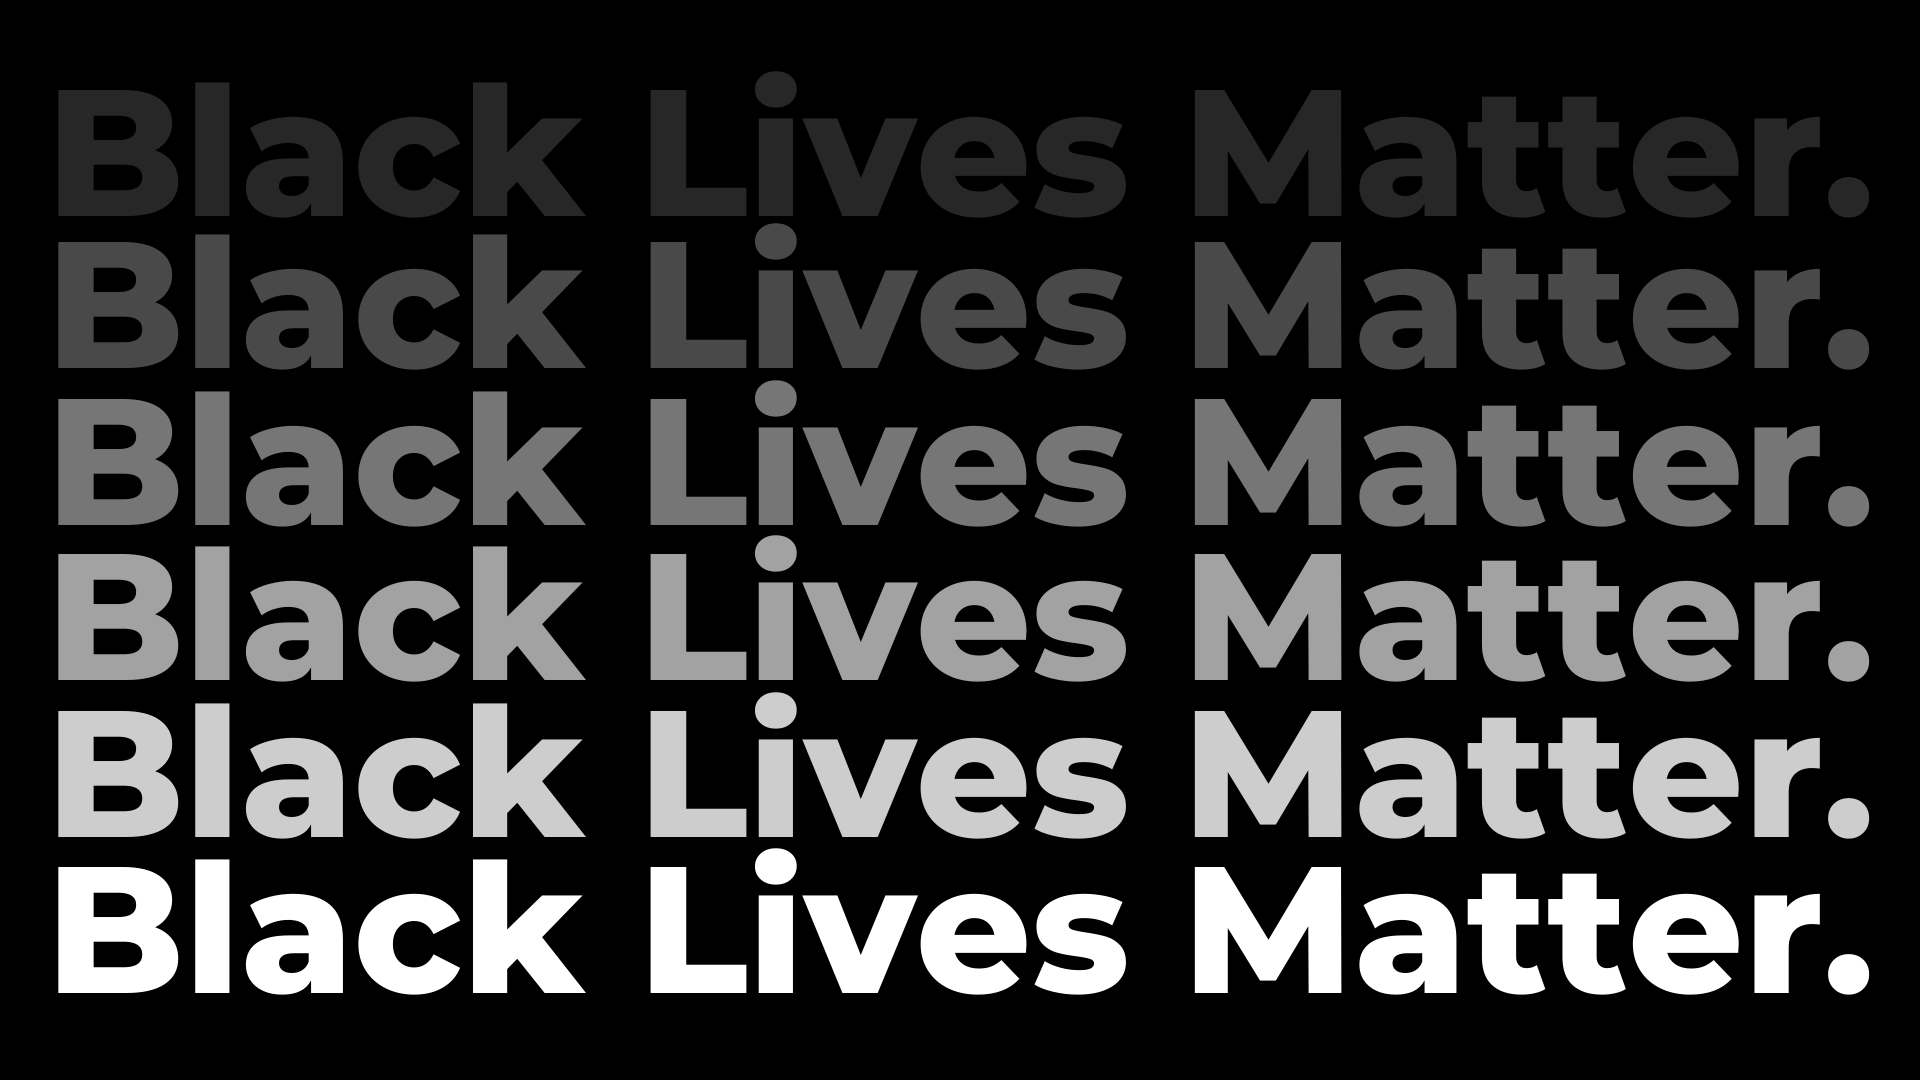 Pitches, Platforms & Privilege: use them all to fight for Black lives